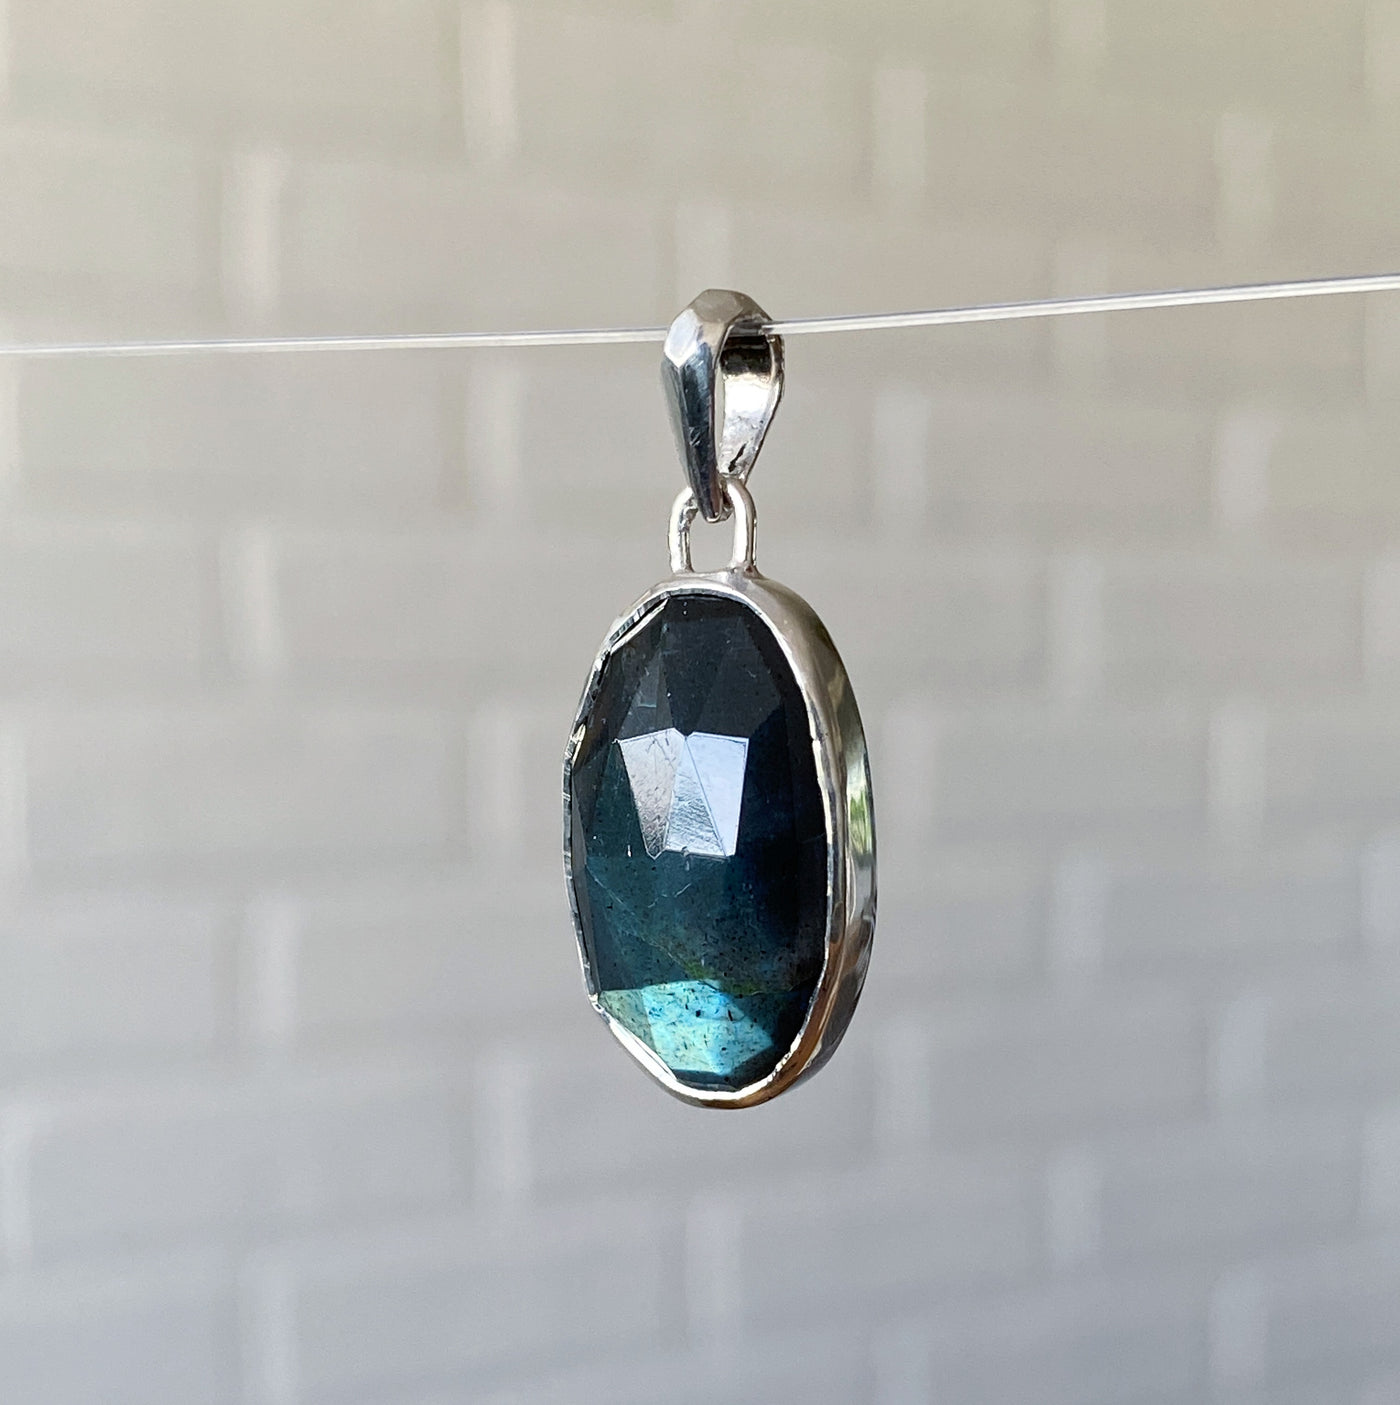 Side view of Large oval rose cut labradorite pendant crafted from sterling silver with a faceted silver bail